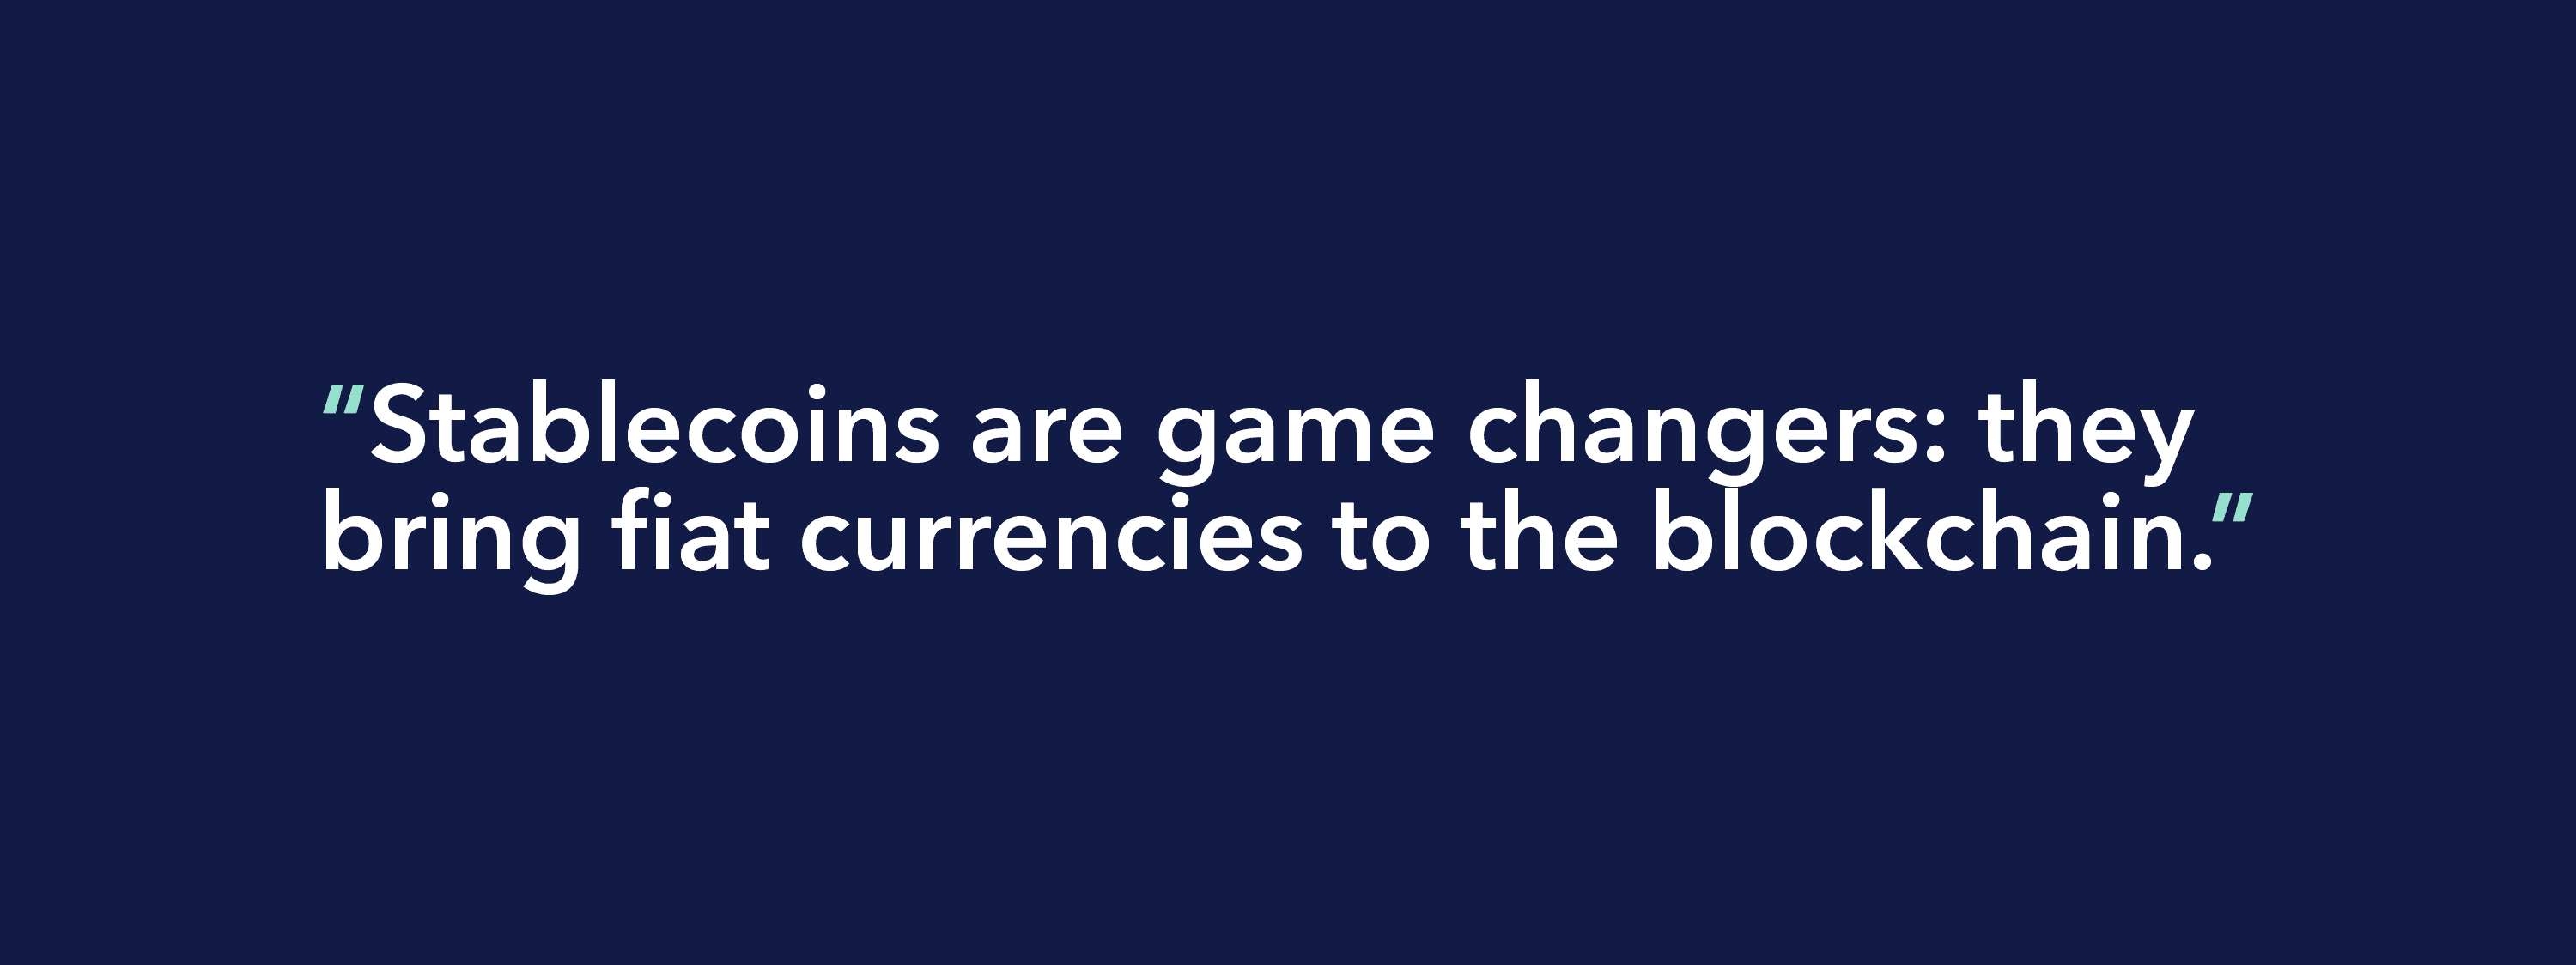 Stablecoins are game changers: they bring fiat currencies to the blockchain.